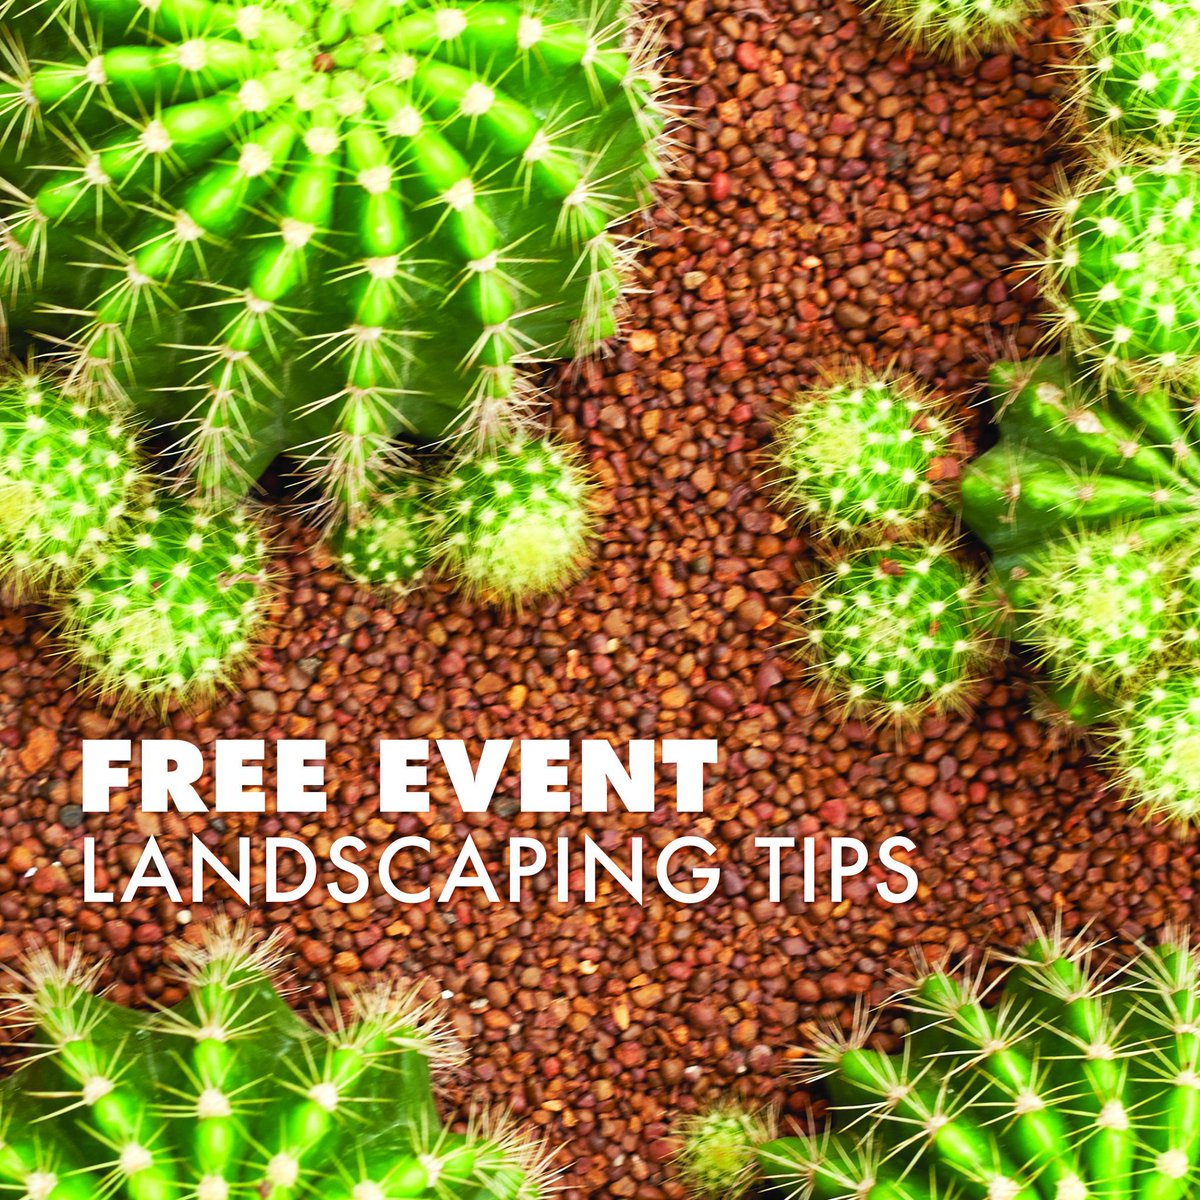 FREE EVENT: Chandler – Build your own Basin👷 Build your own rainwater harvesting basin in this free hands-on workshop! Please wear closed-toe shoes, hats, and sunscreen.@cityofchandler #WaterUseItWisely 🗓️ April 6 @ 9:30 am - 12:00 pm 📍 Register here: buff.ly/47WwYYb